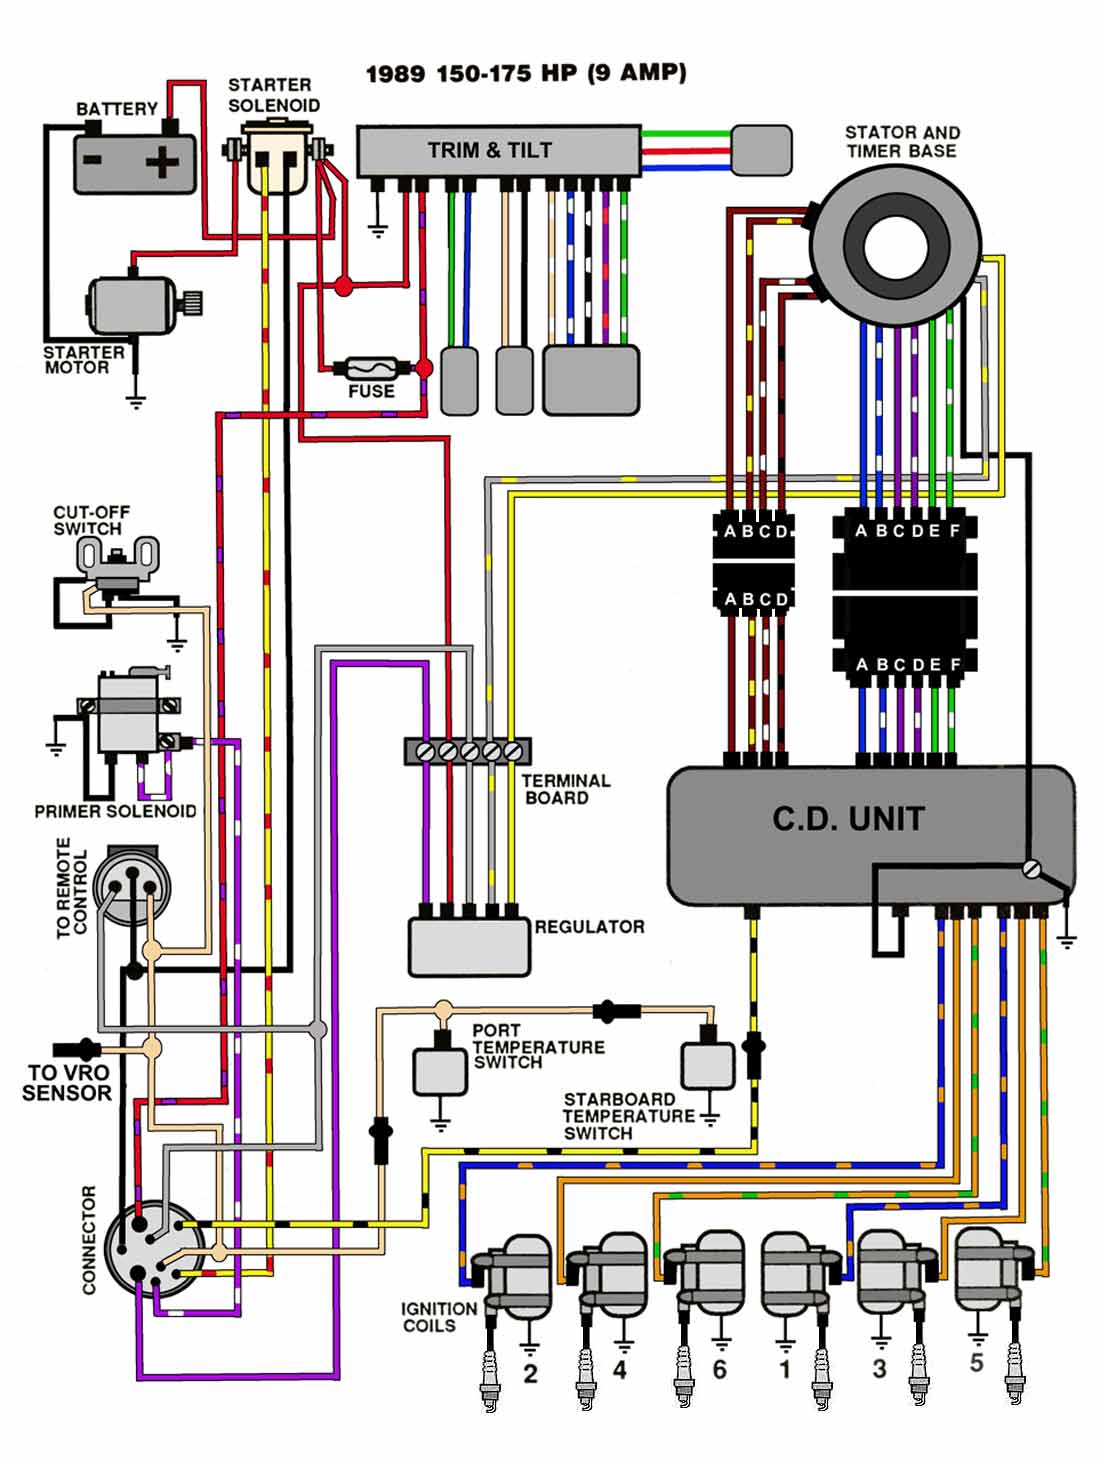 Ignition Switch Wiring Suzuki Outboard Wiring Harness Diagram from maxrules.com